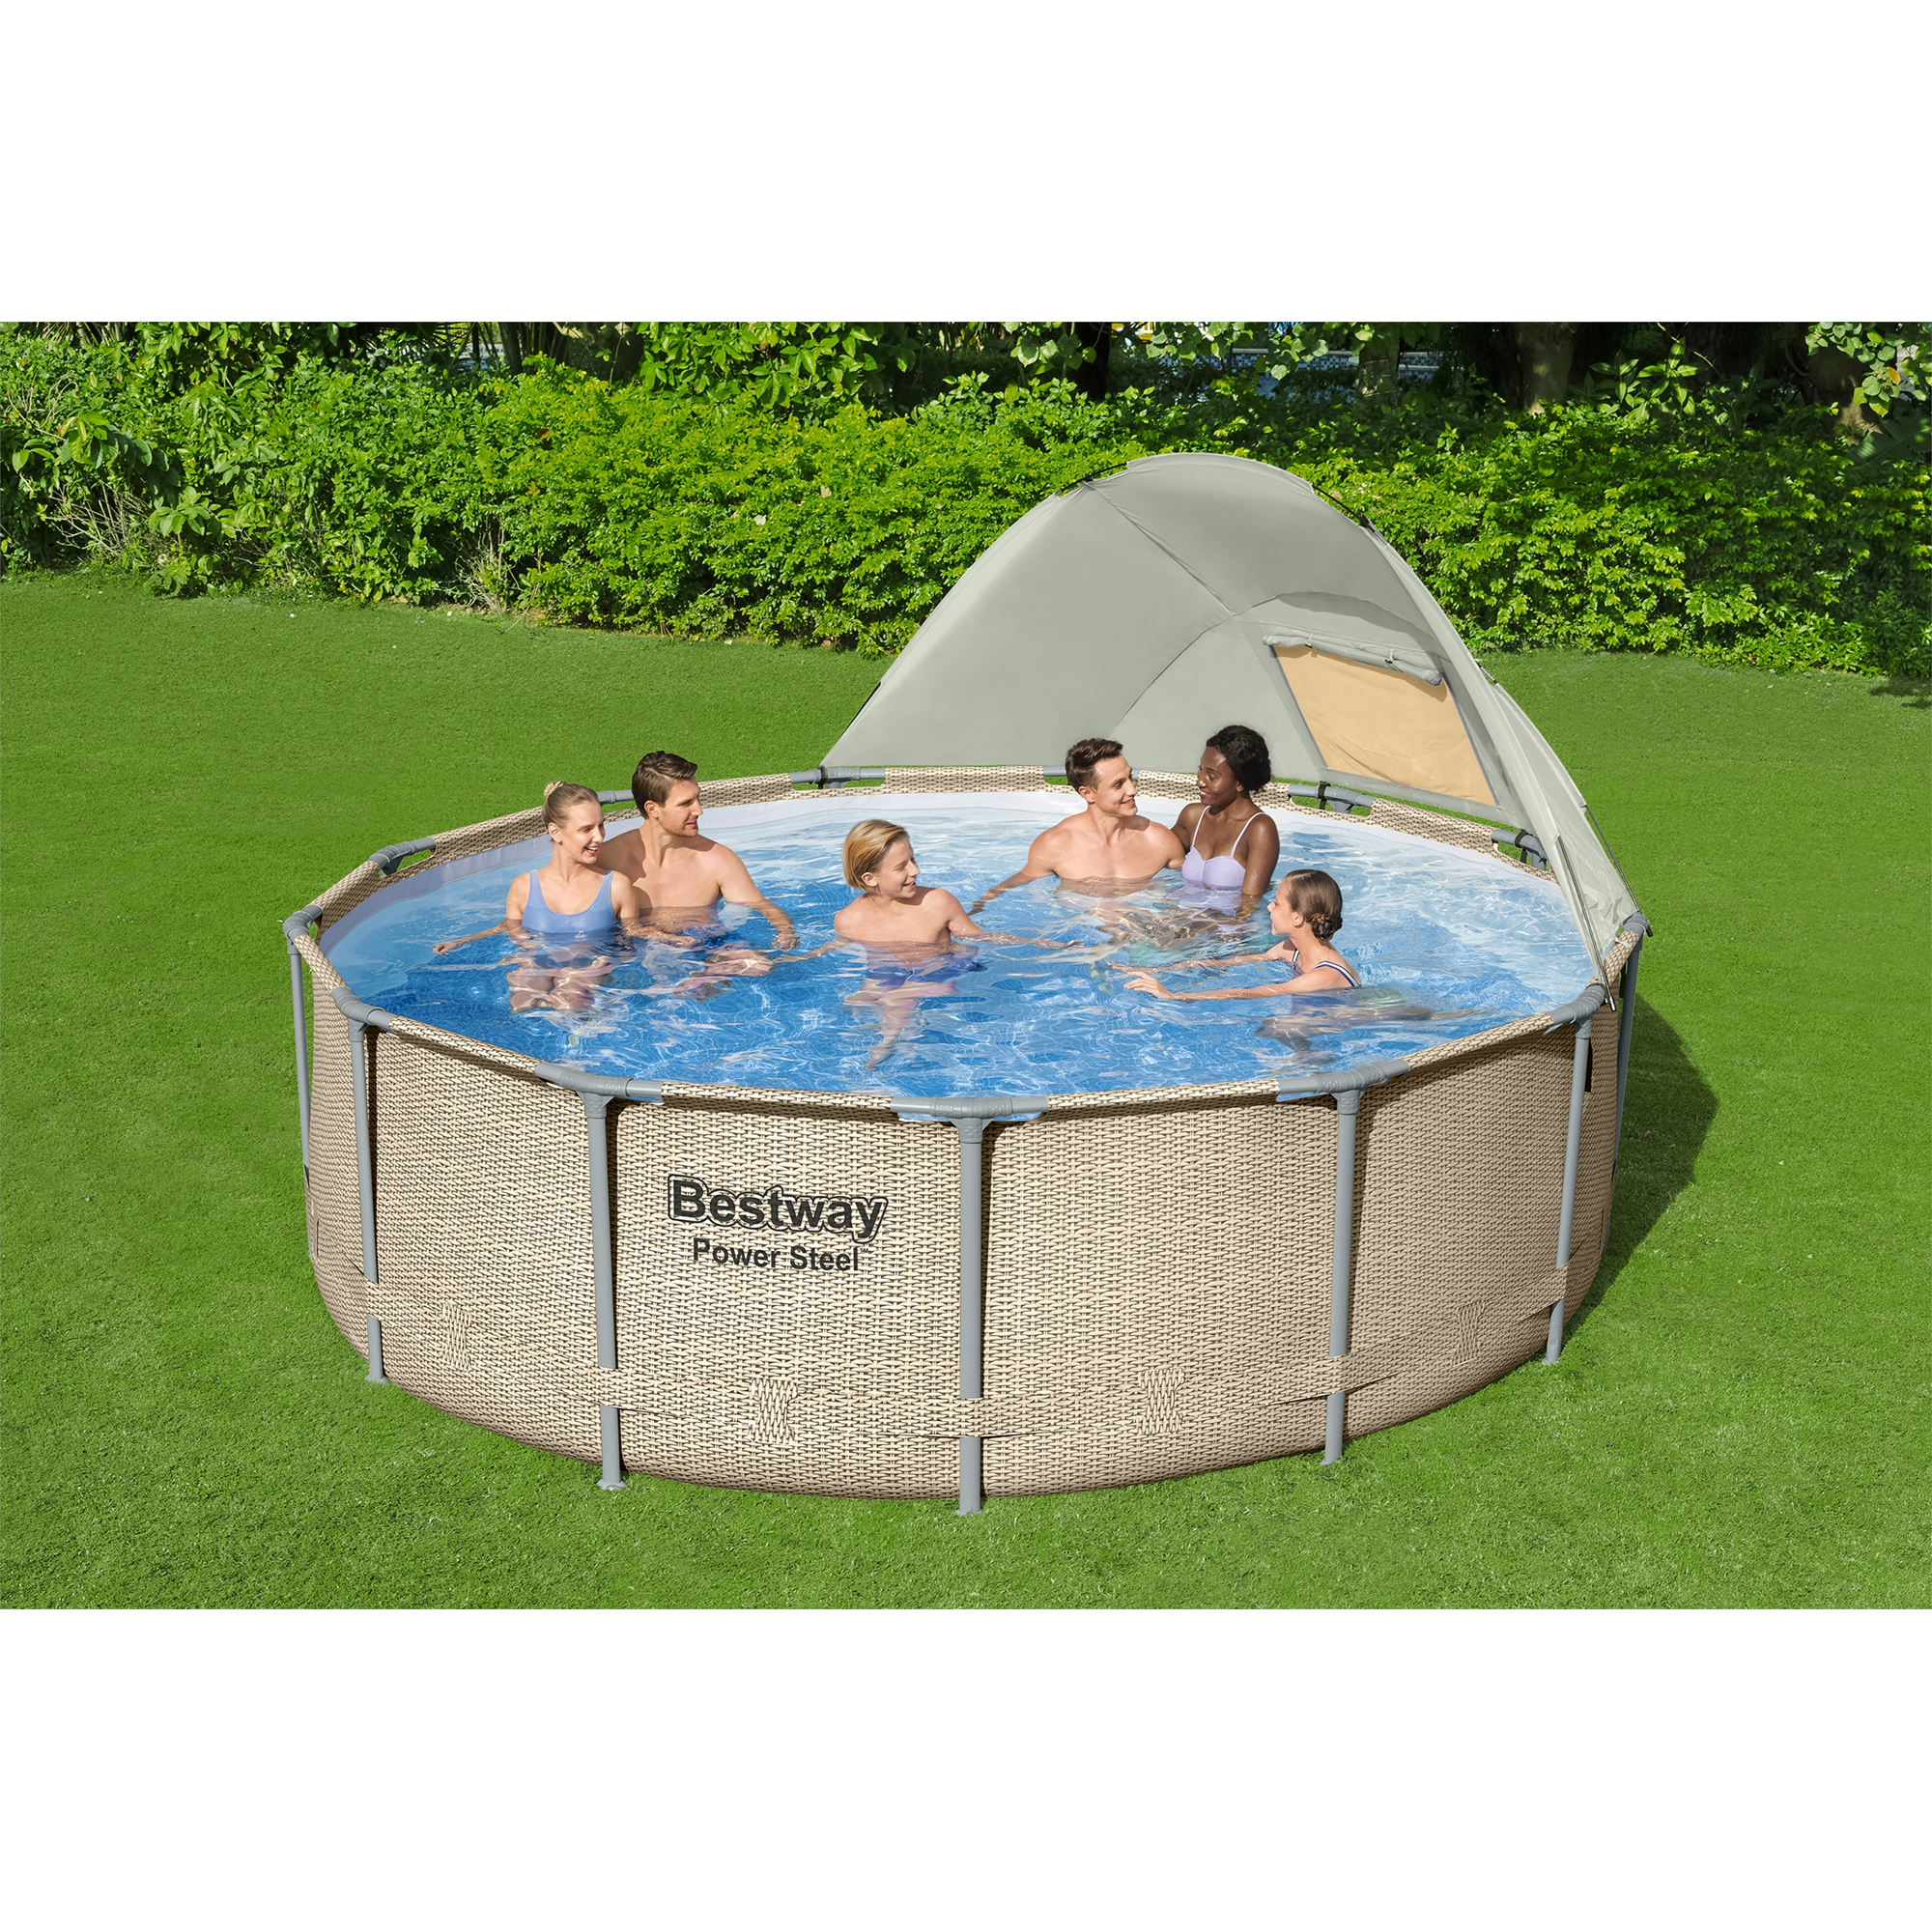 Bestway Power Steel 13' x 42" Above Ground Swimming Pool Set with Canopy - image 3 of 12